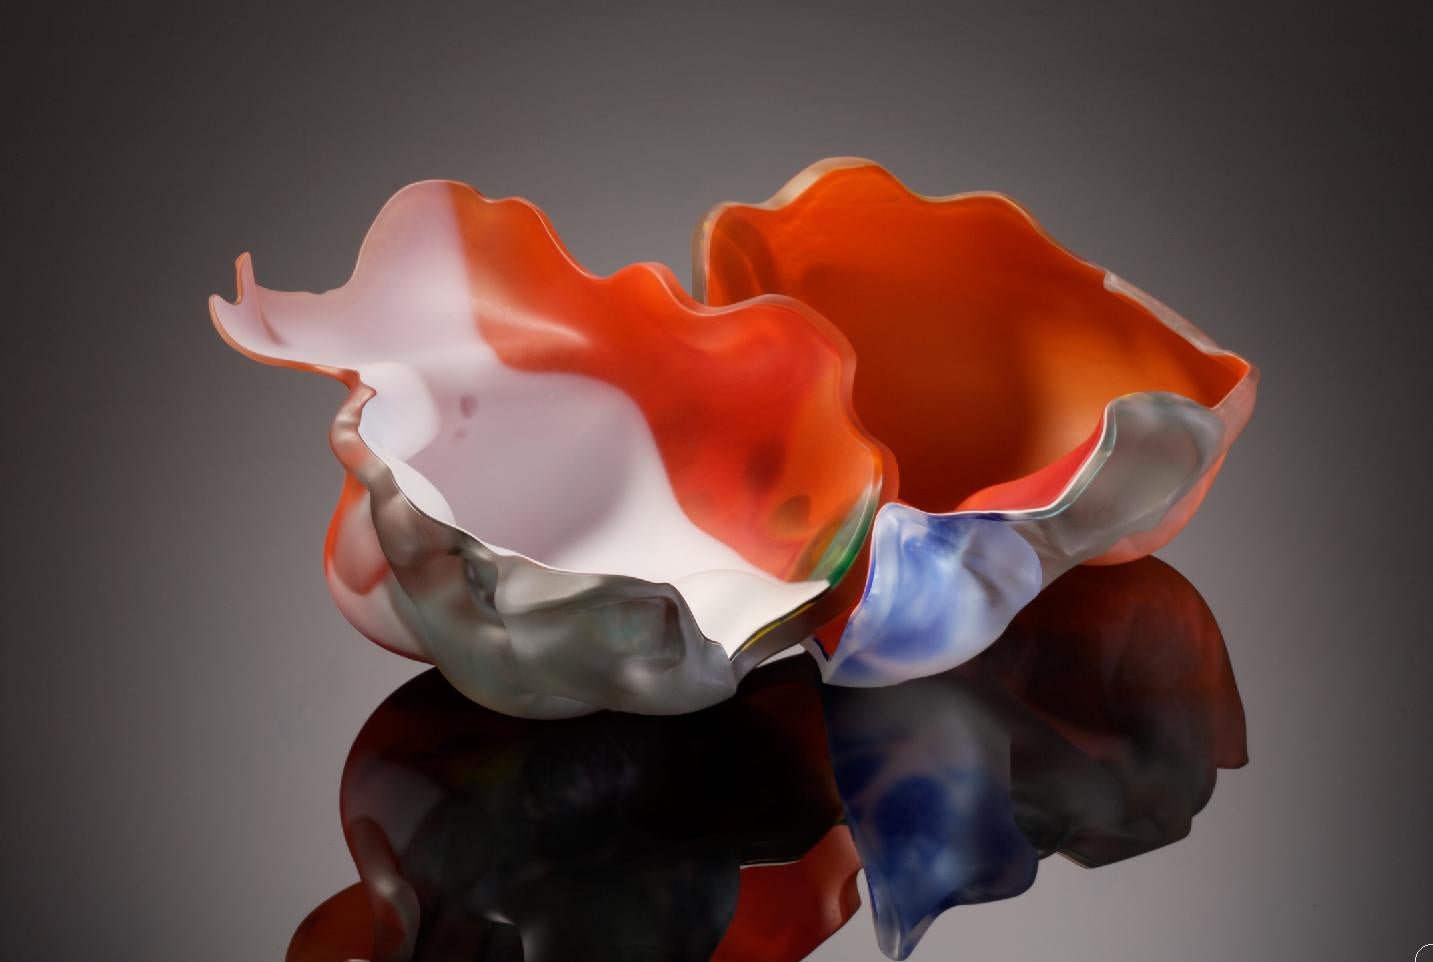 "Russian Group 2006-7 #12", Blown Glass Sculpture, Sandblasted Surface, Abstract